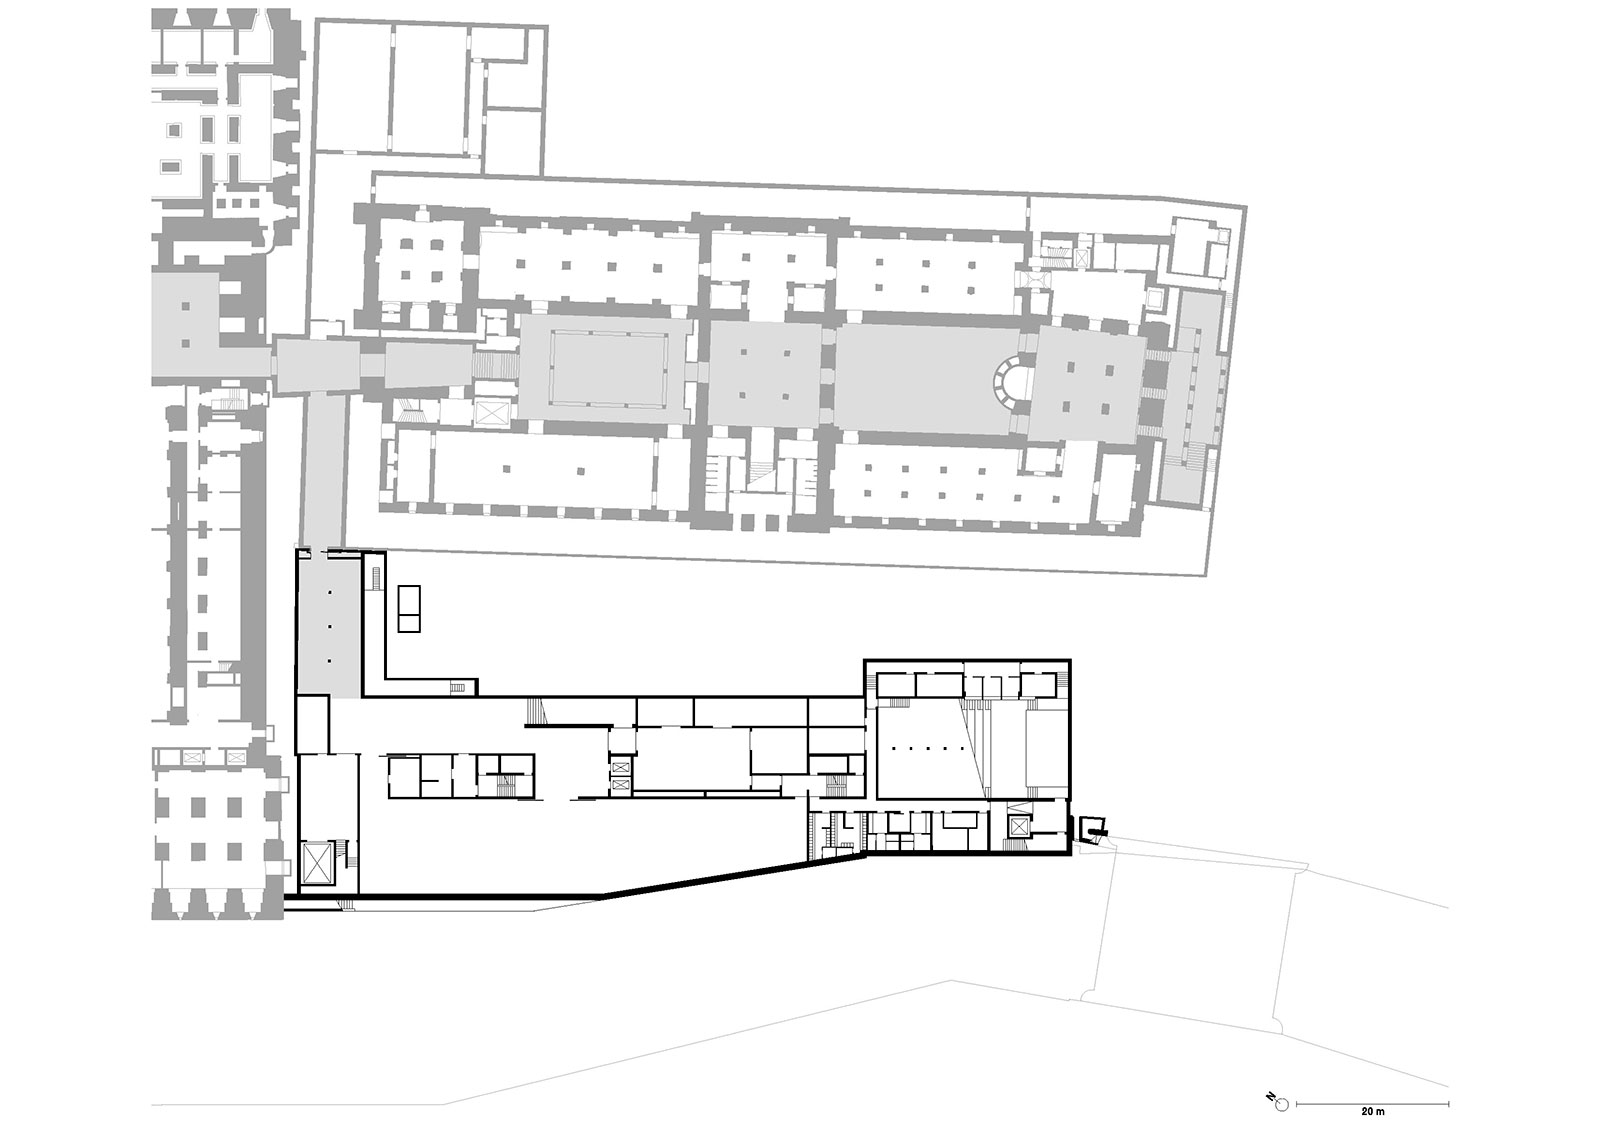 James Simon Galerie Germany David Chipperfield Architects Berlin drawing courtesy of David Chipperfield Architects